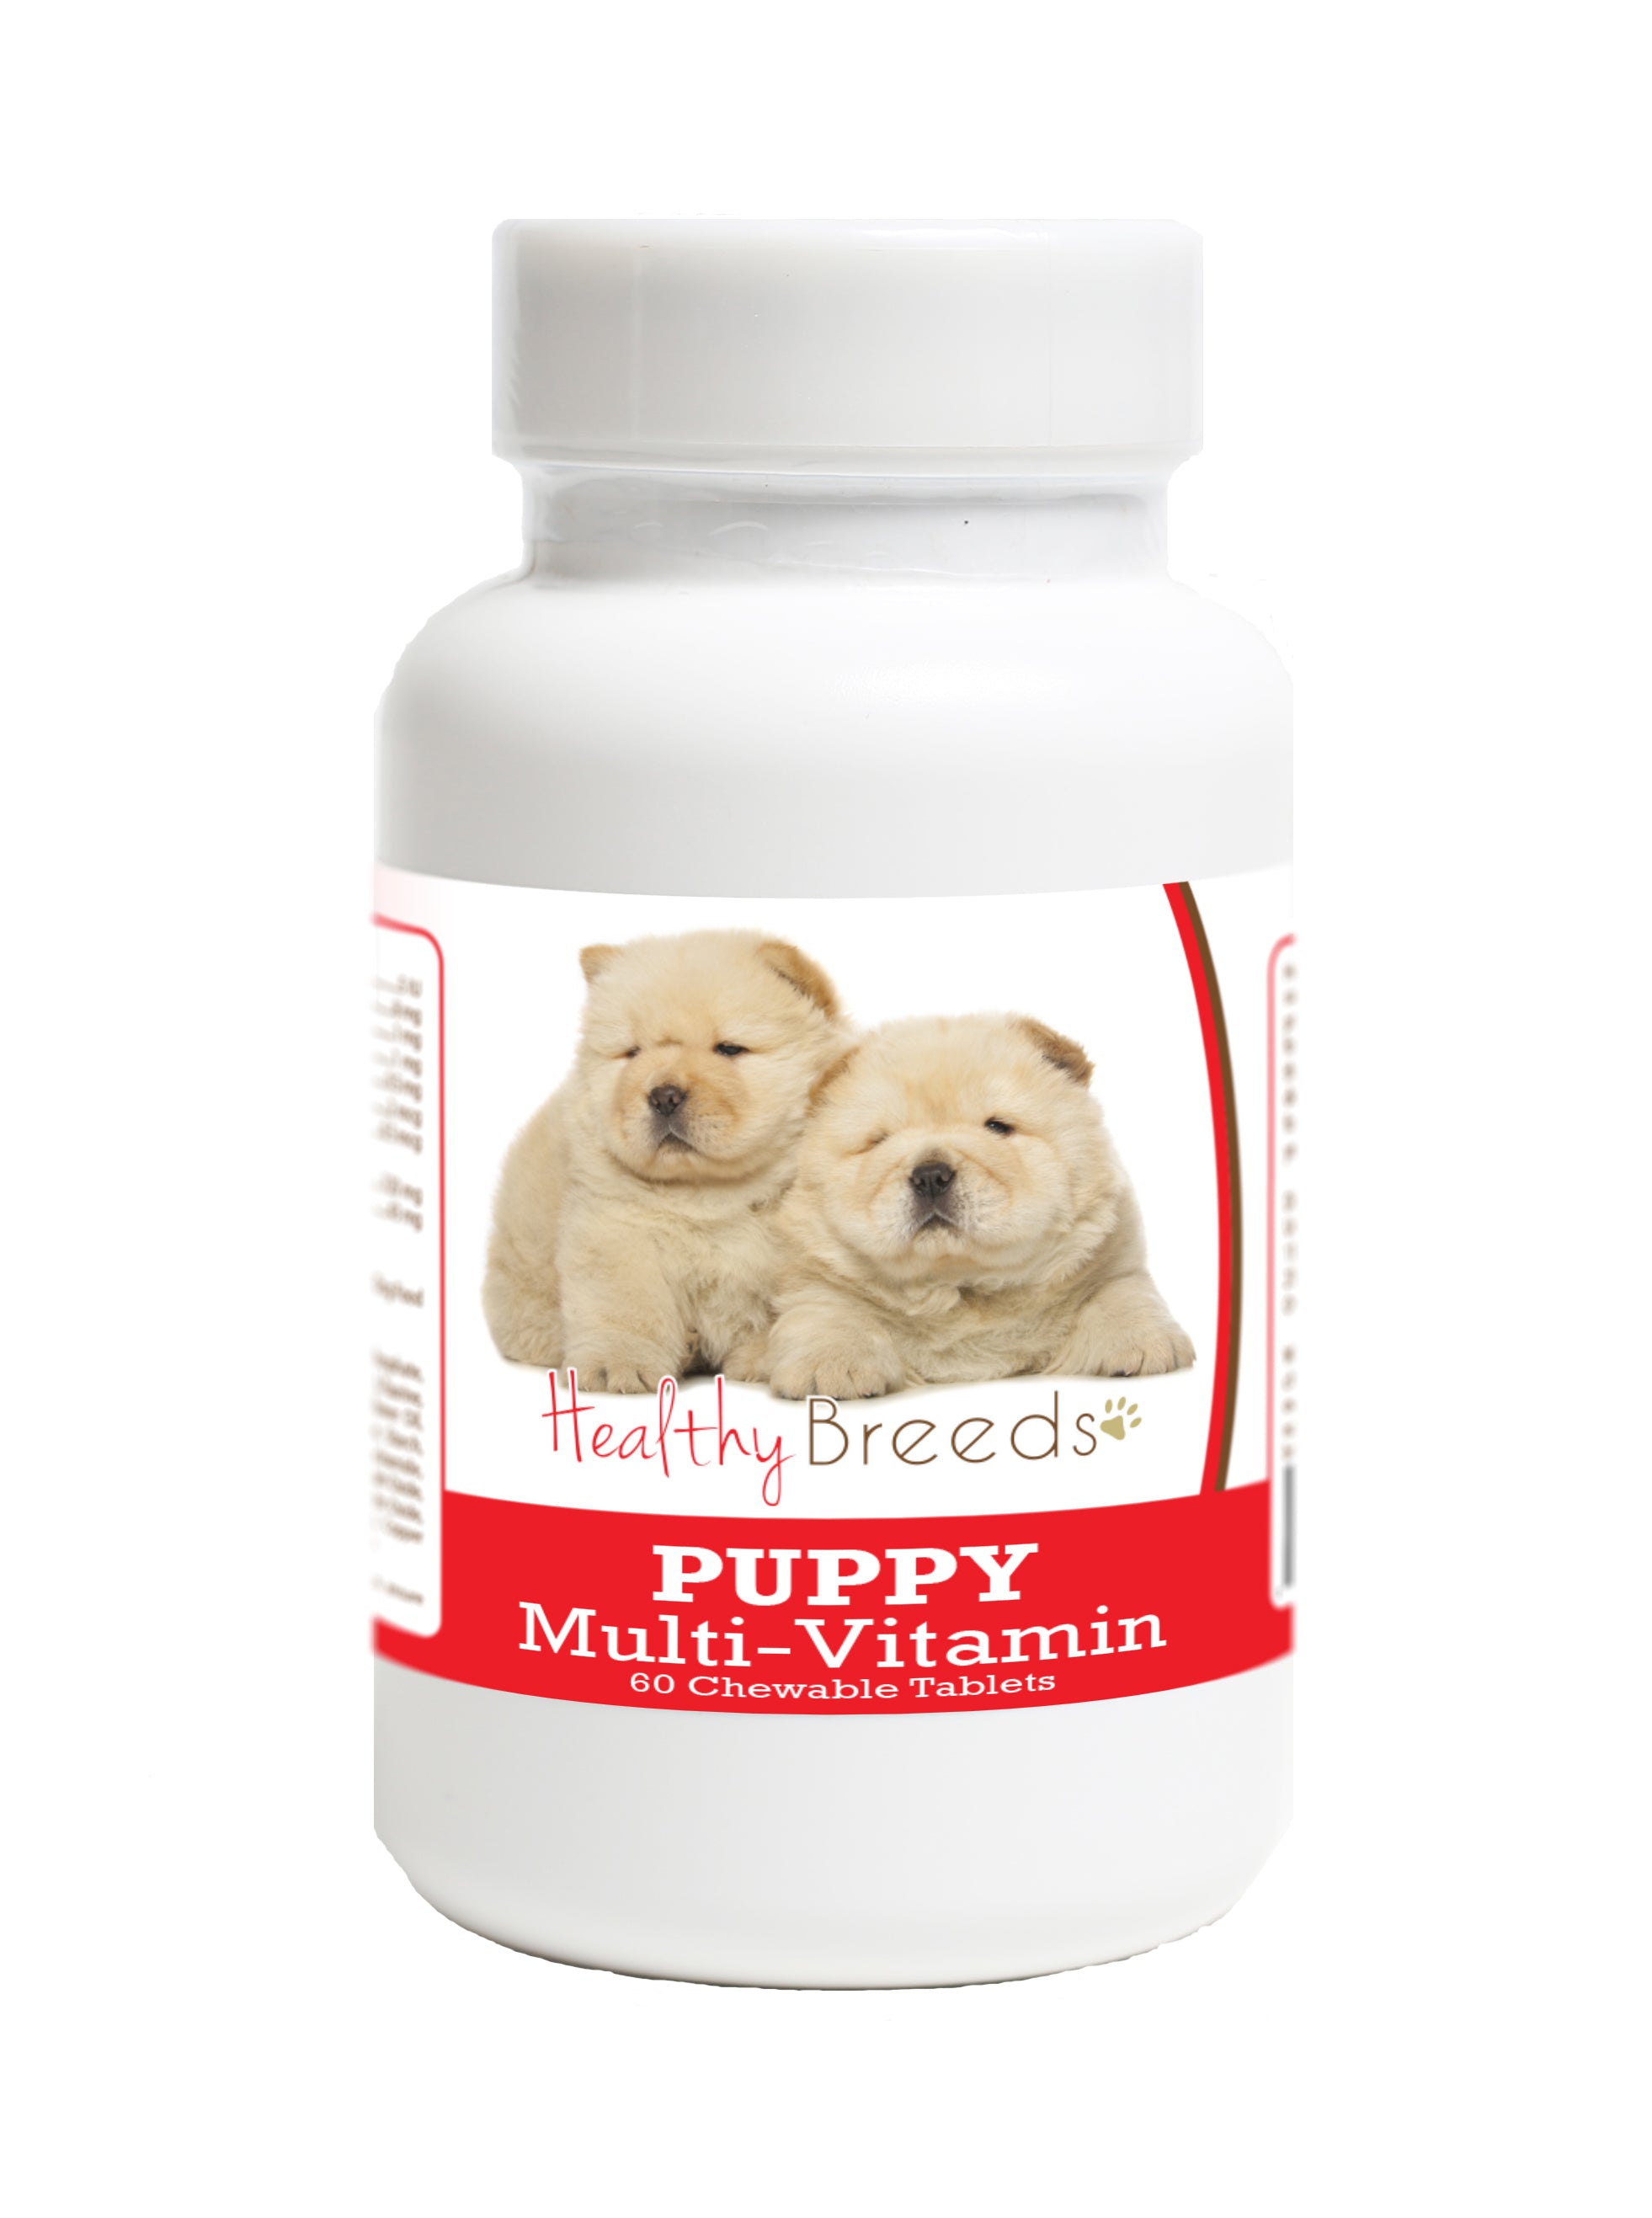 Chow Chow Puppy Dog Multivitamin Tablet 60 Count